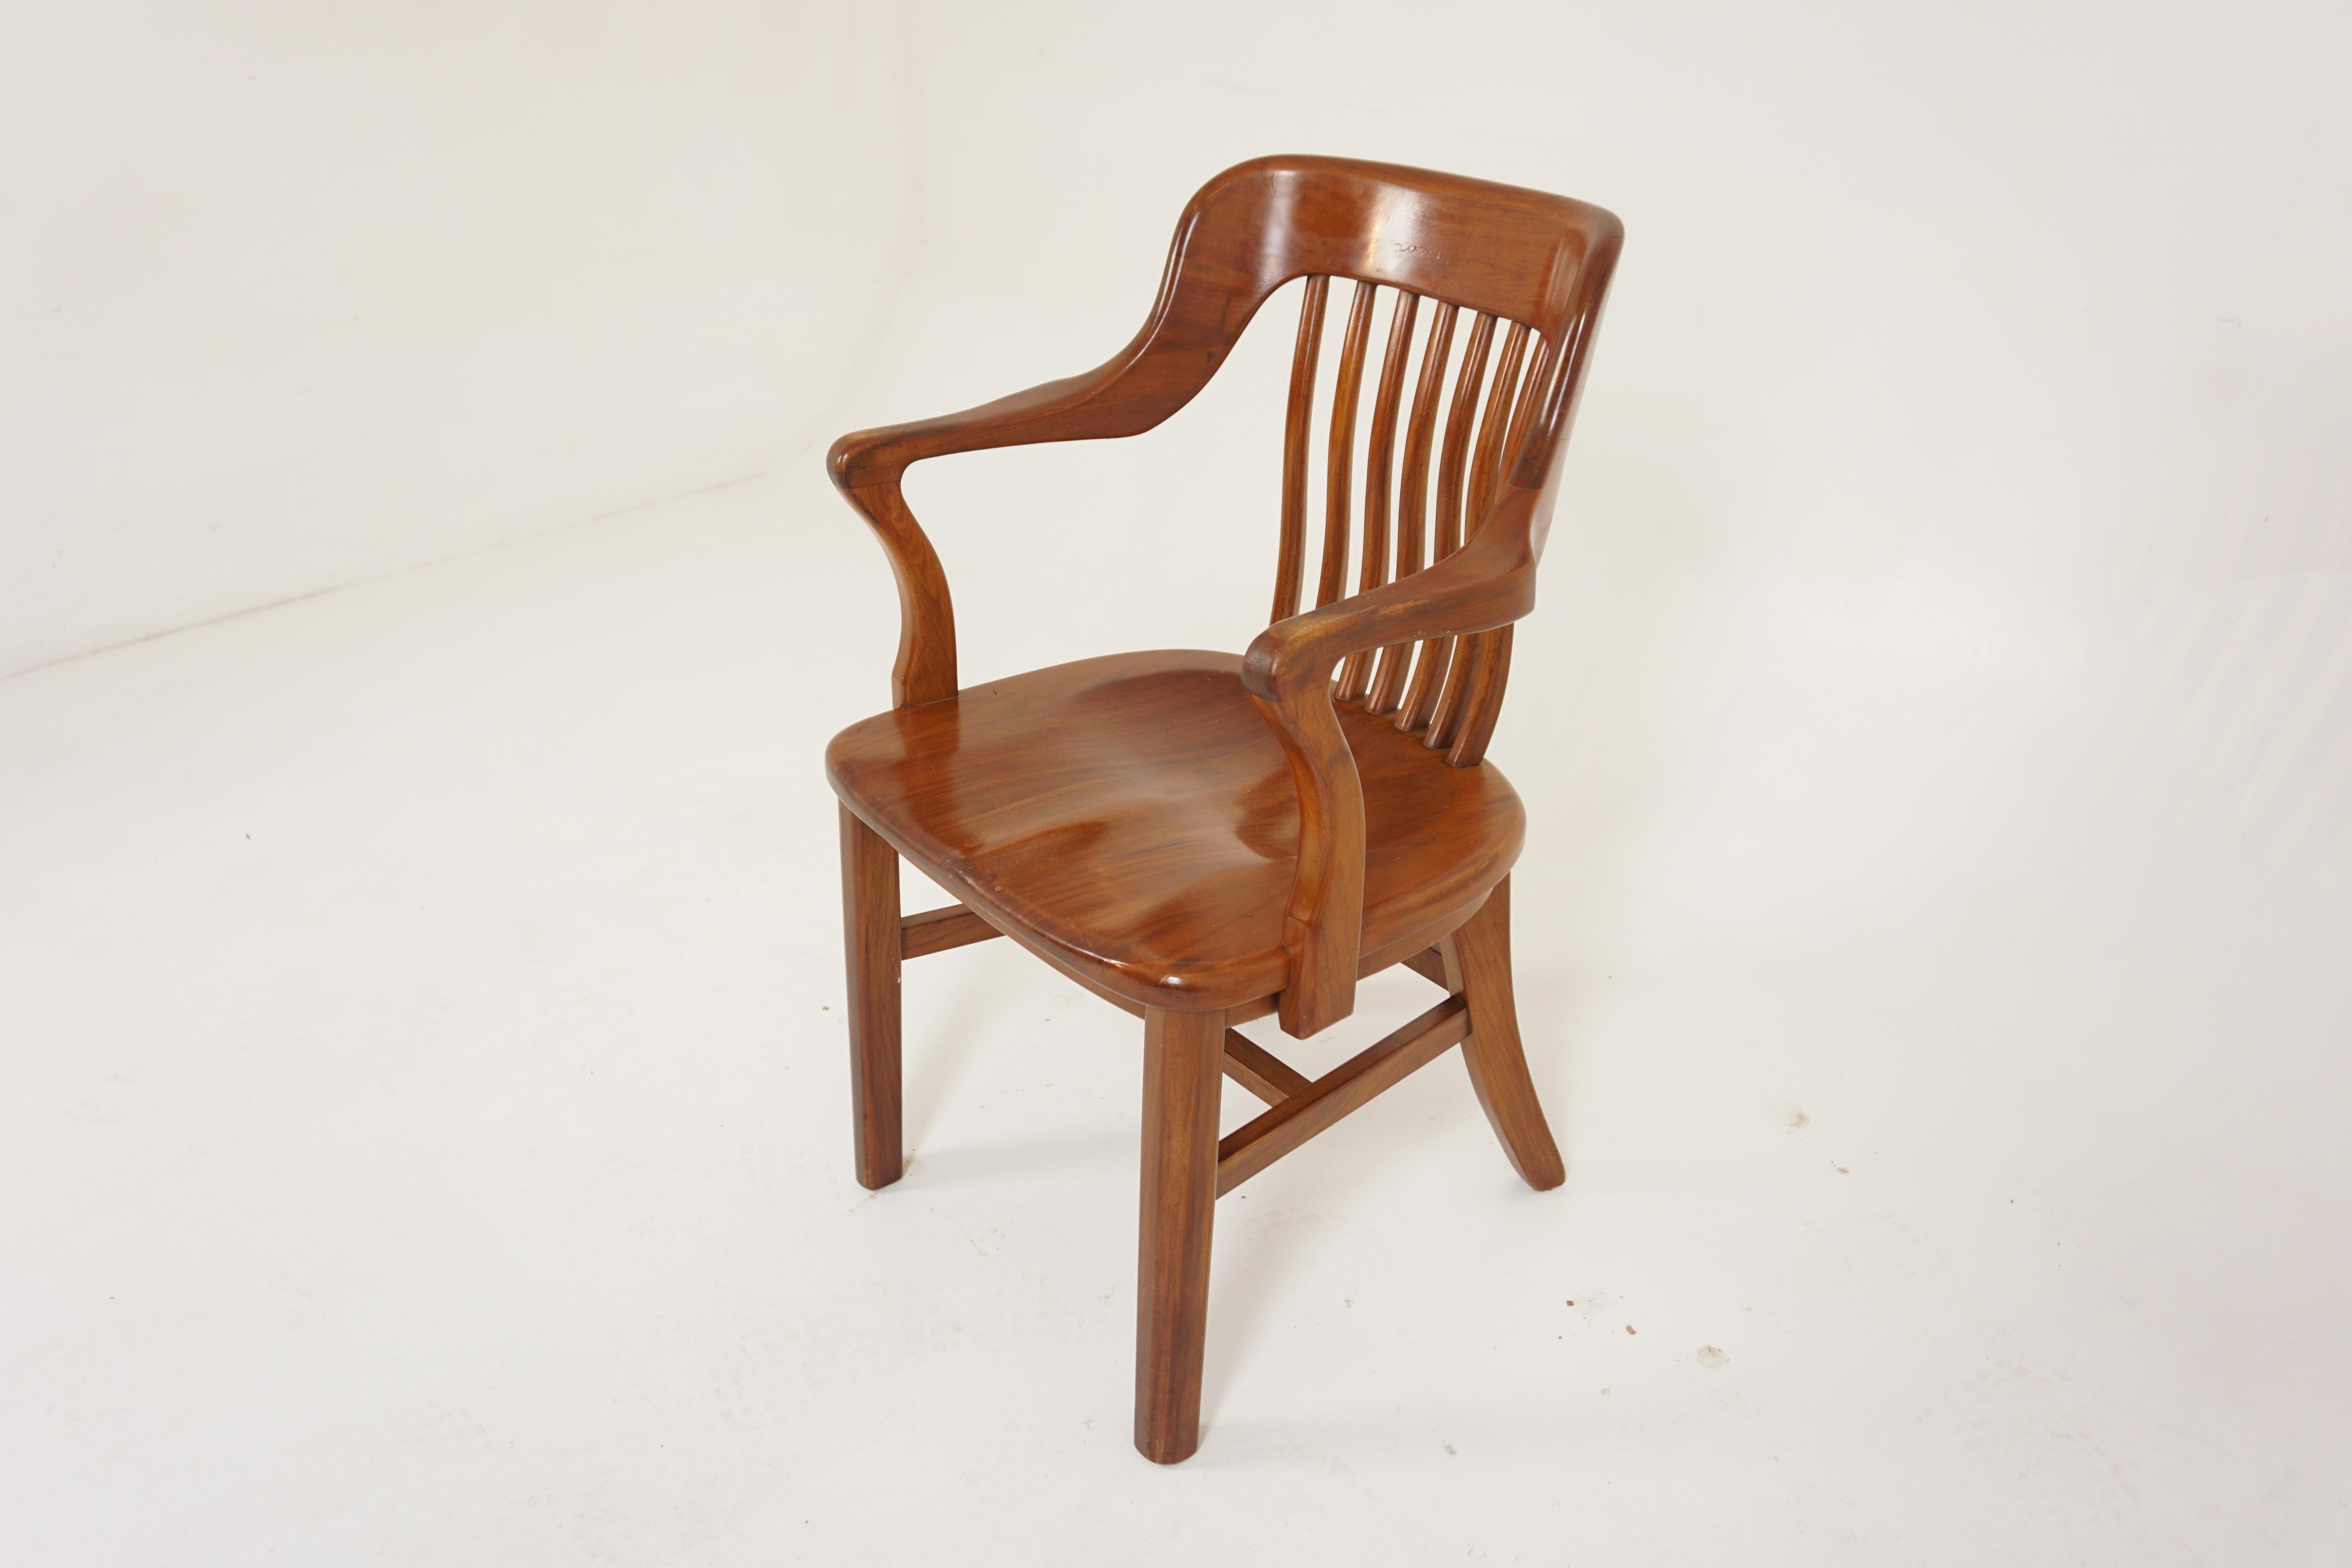 Vintage Solid Walnut Office Chair, Desk Chair, American 1930, B2890

American 1930
Solid Walnut
Original Finish
With carved top rail
Sloped vertical slats
Solid walnut seat
Standing on four legs
United by stretchers
Nice quality and in